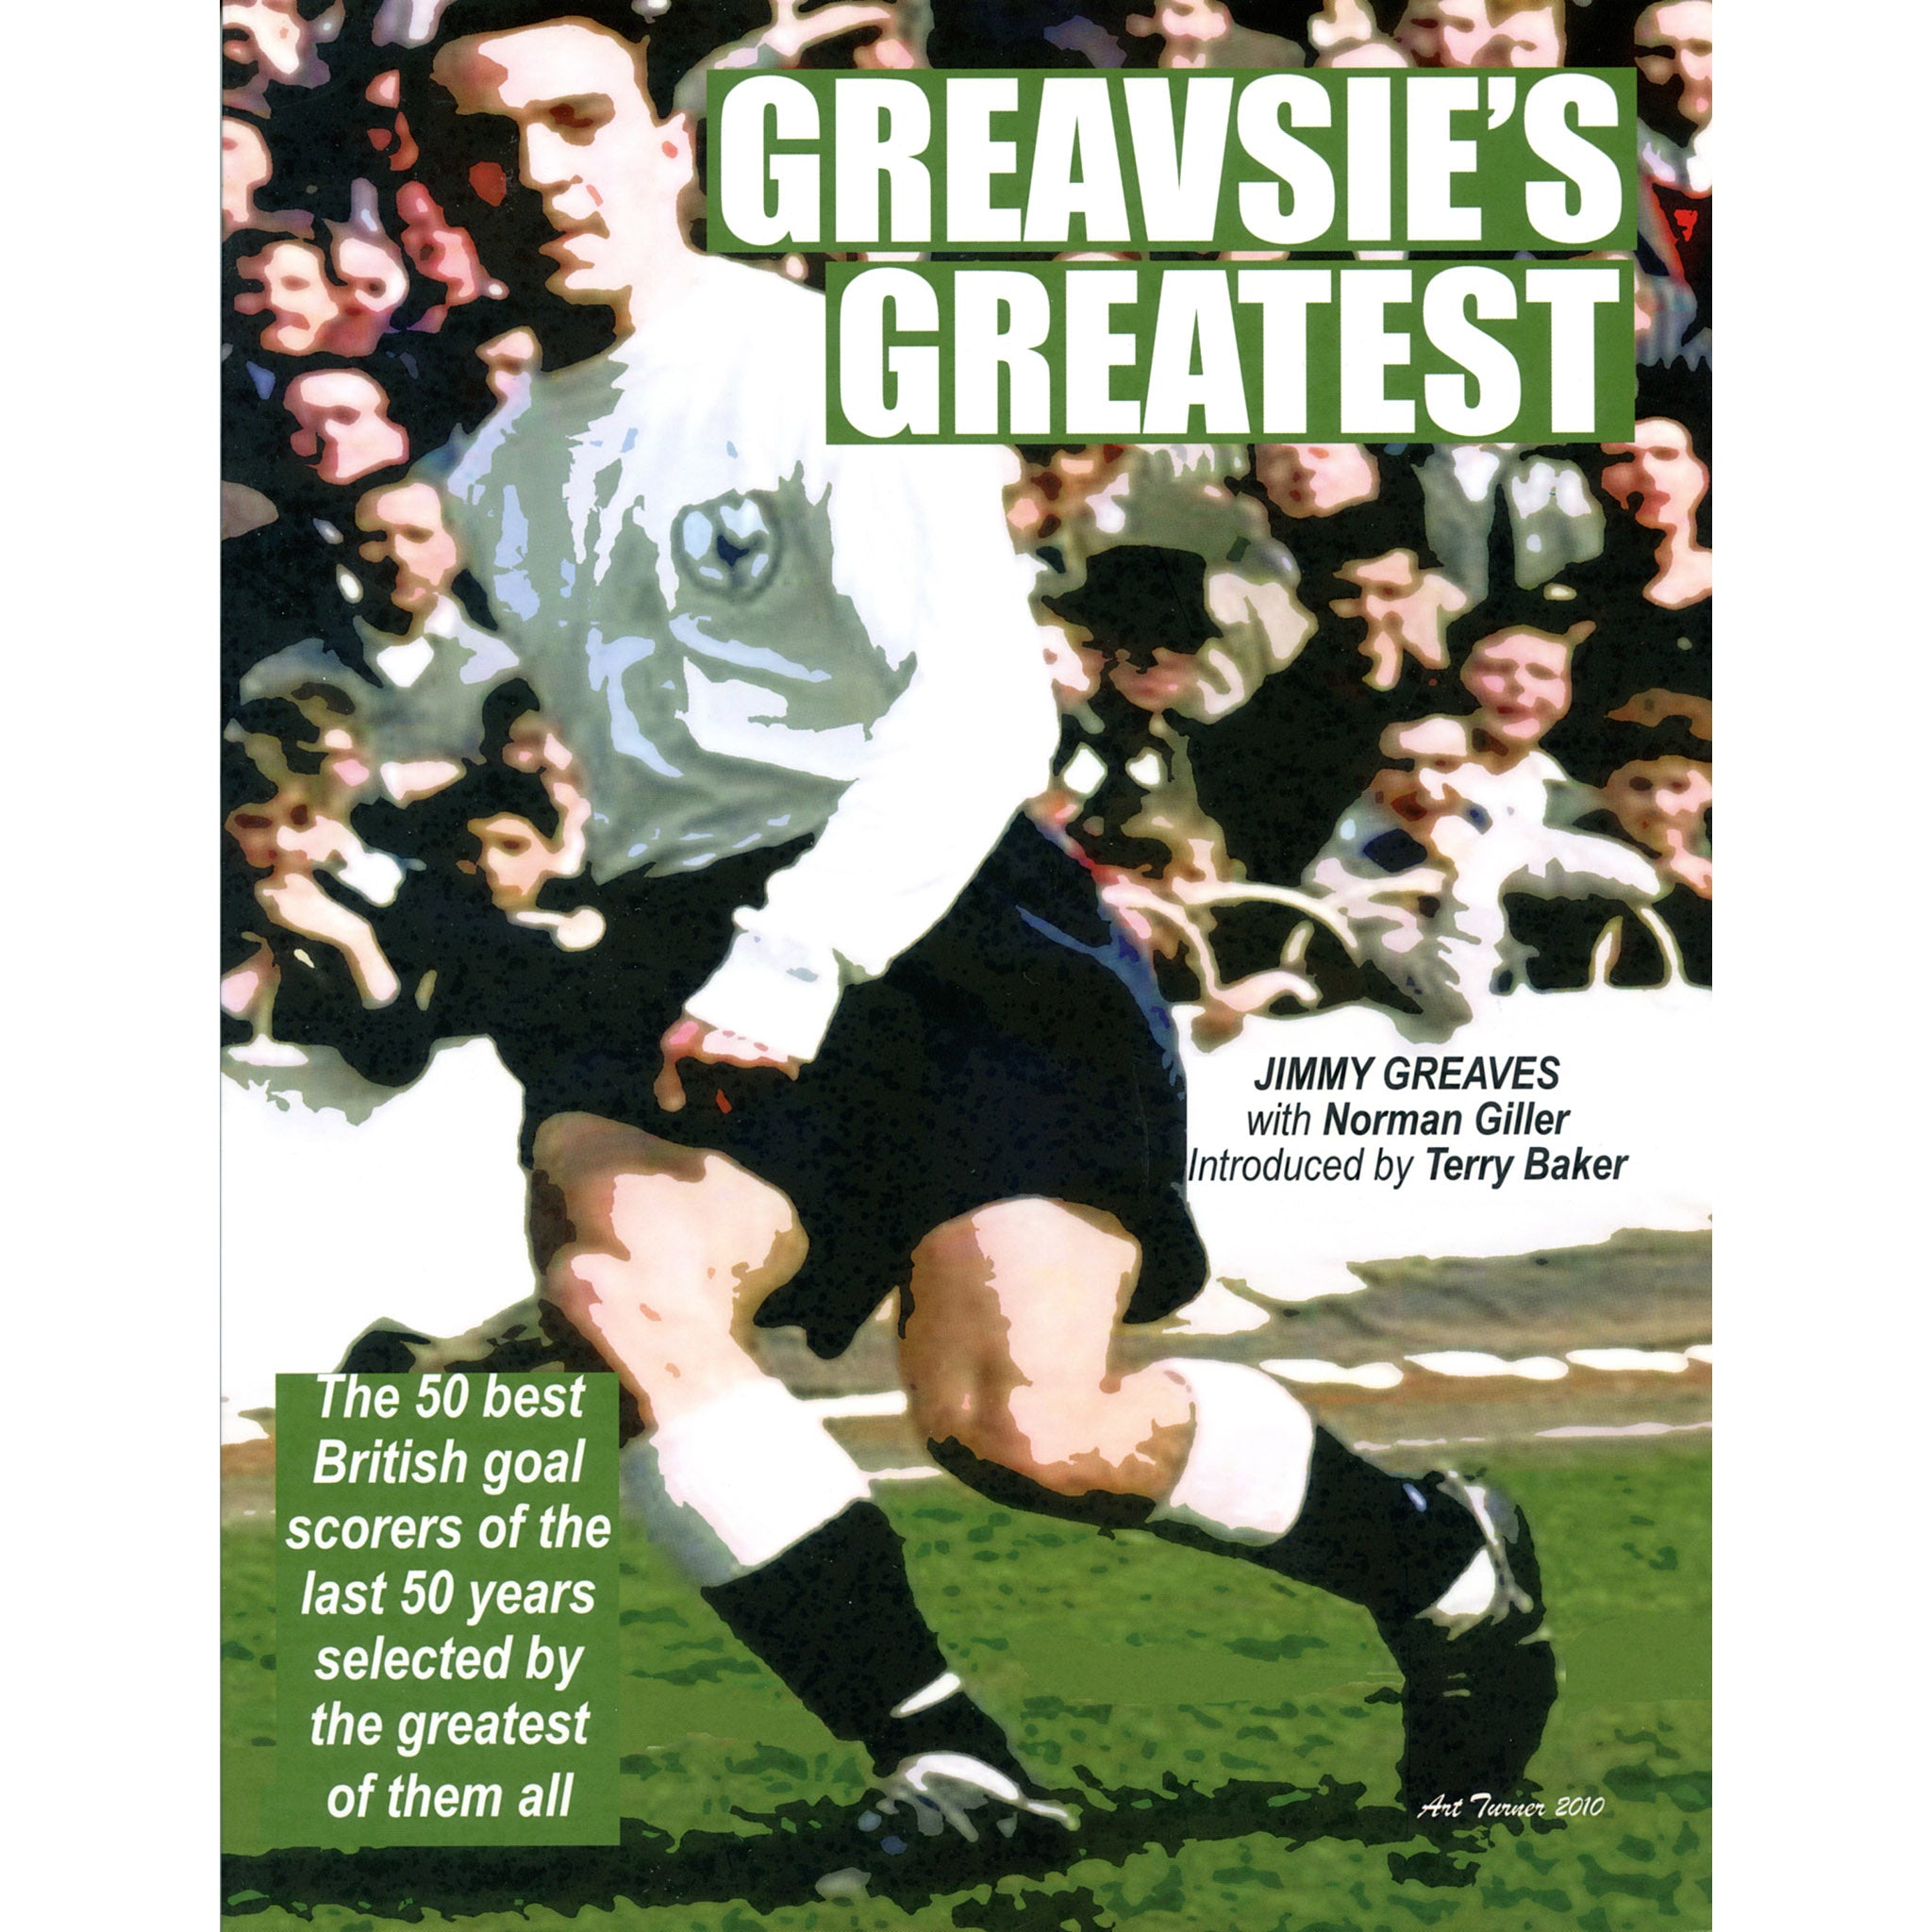 Greavsie's Greatest – The 50 best British goal scorers of the last 50 years selected by the greatest of them all